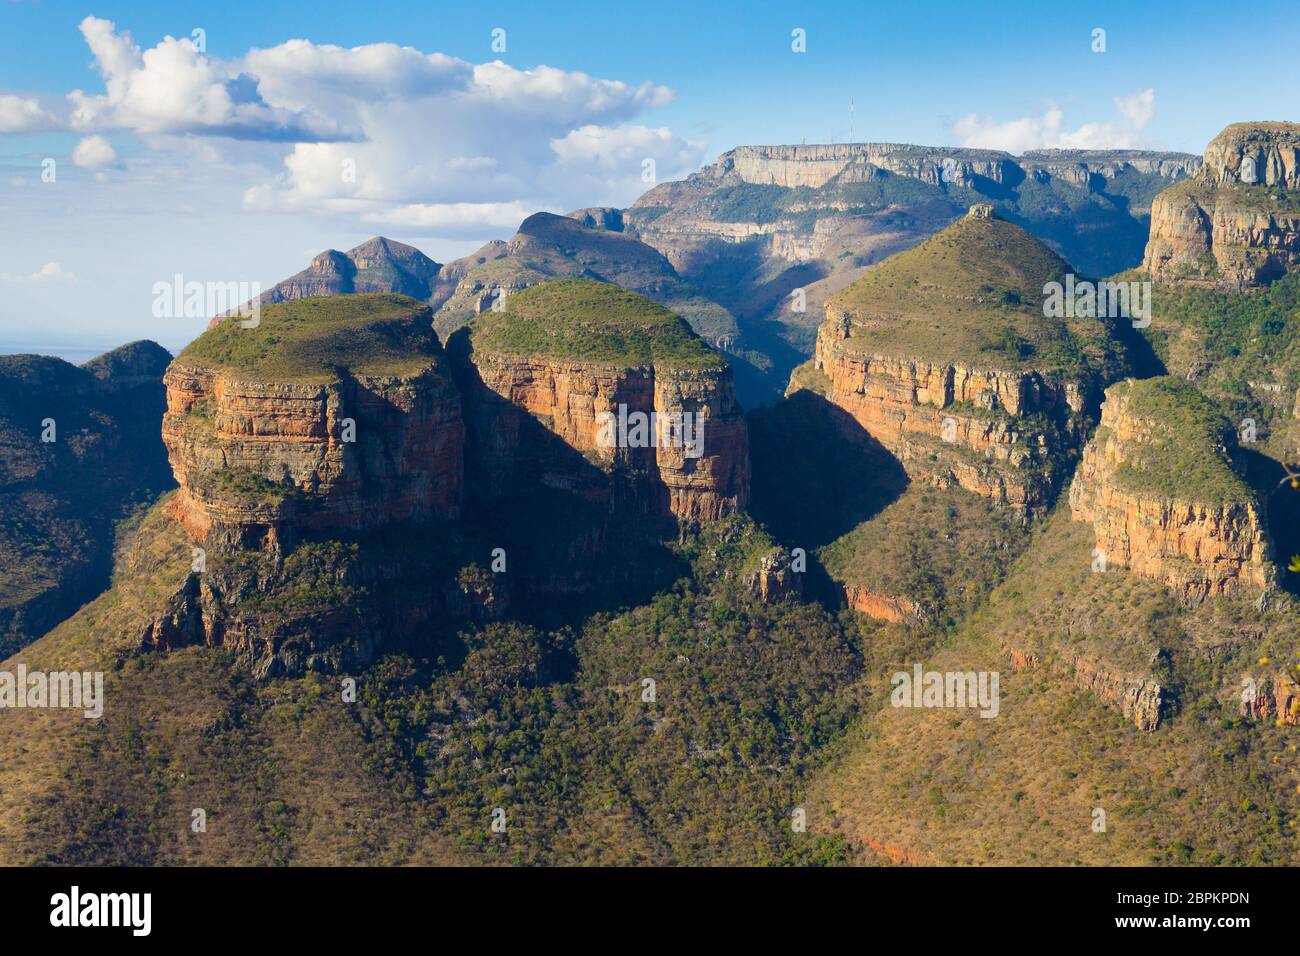 The Three Rondavels view from Blyde River Canyon, South Africa. Famous landmark. African panorama Stock Photo